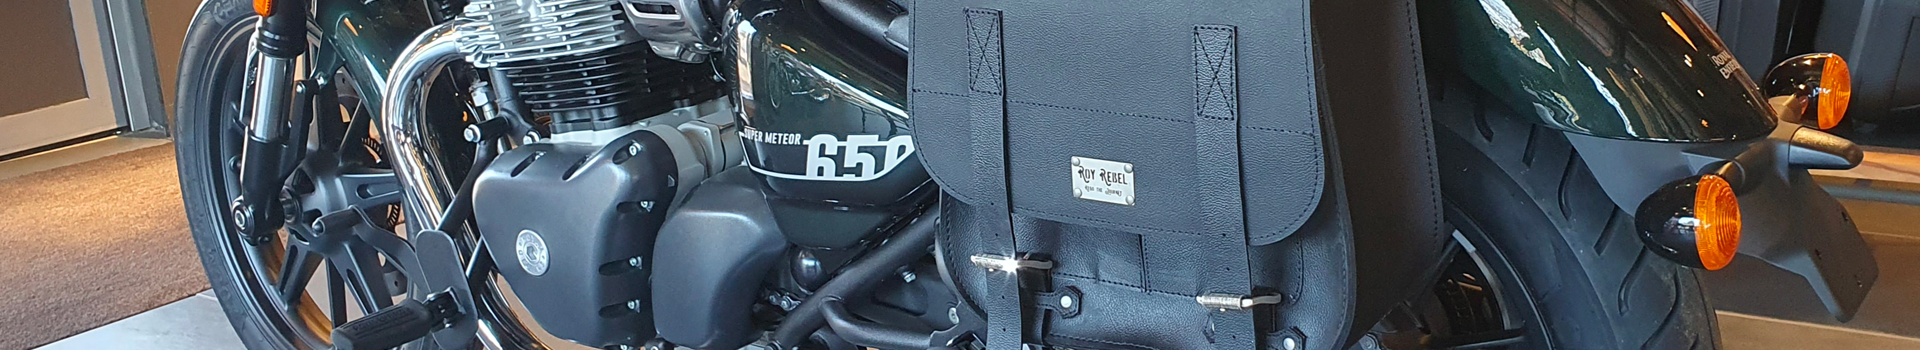 Motorcycle bag mounts for Royal Enfield